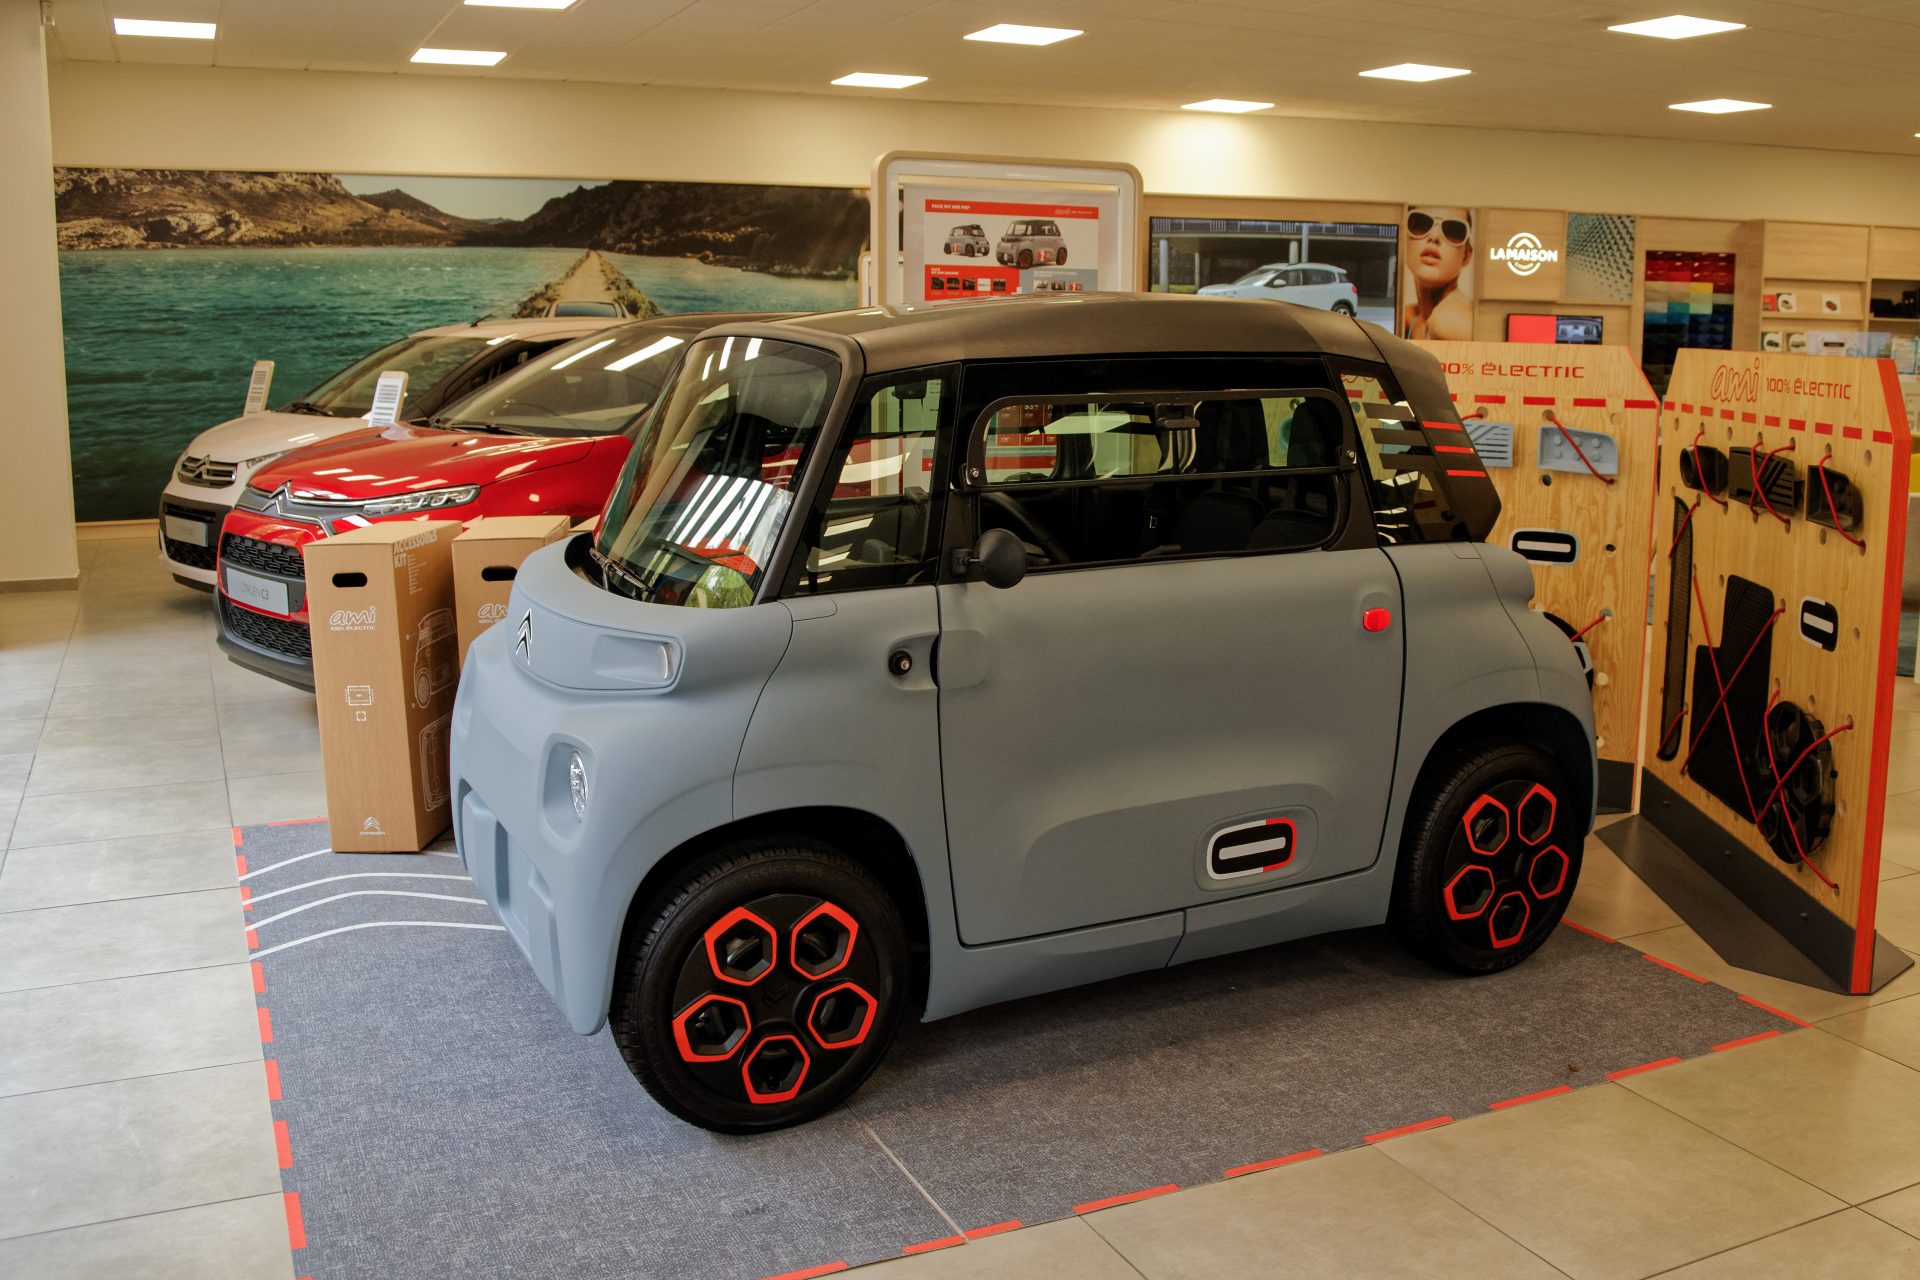 Meet Luvly, an ‘IKEA-style’ flat-packed electric car